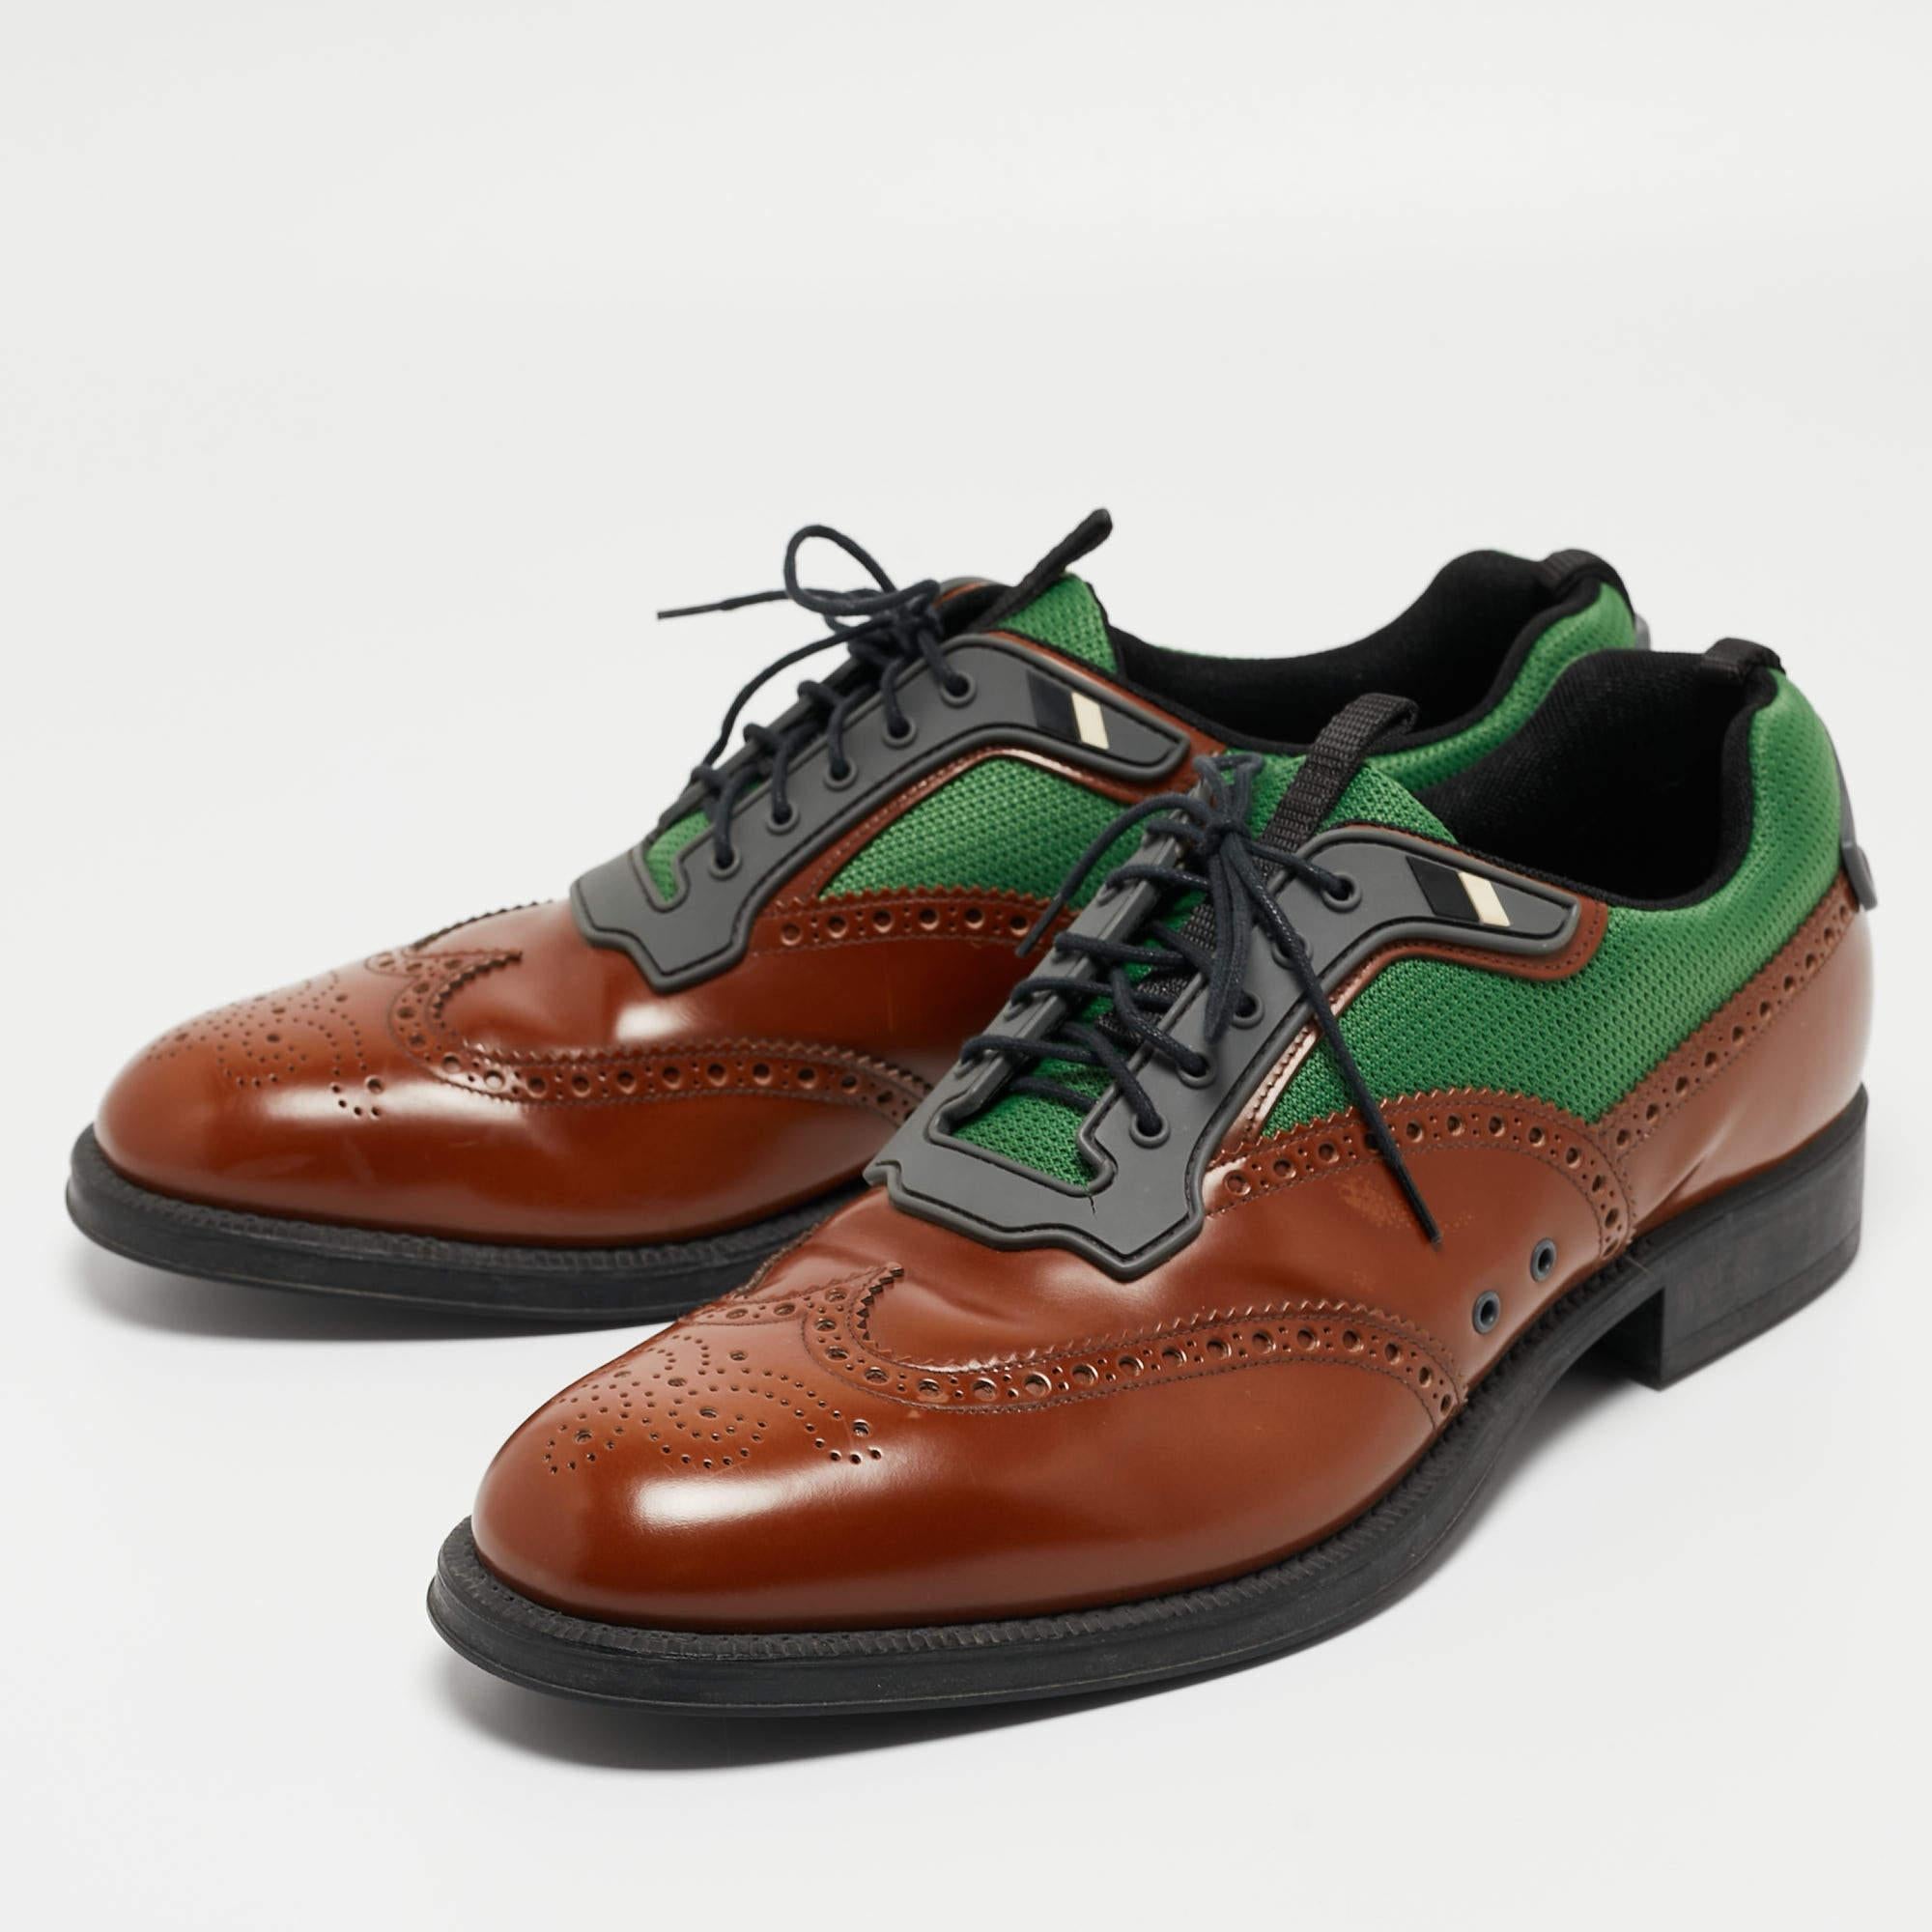 Designed to elevate your style quotient and give you comfort at the same time, these Prada oxfords are crafted using the best materials. Invest in them today.

